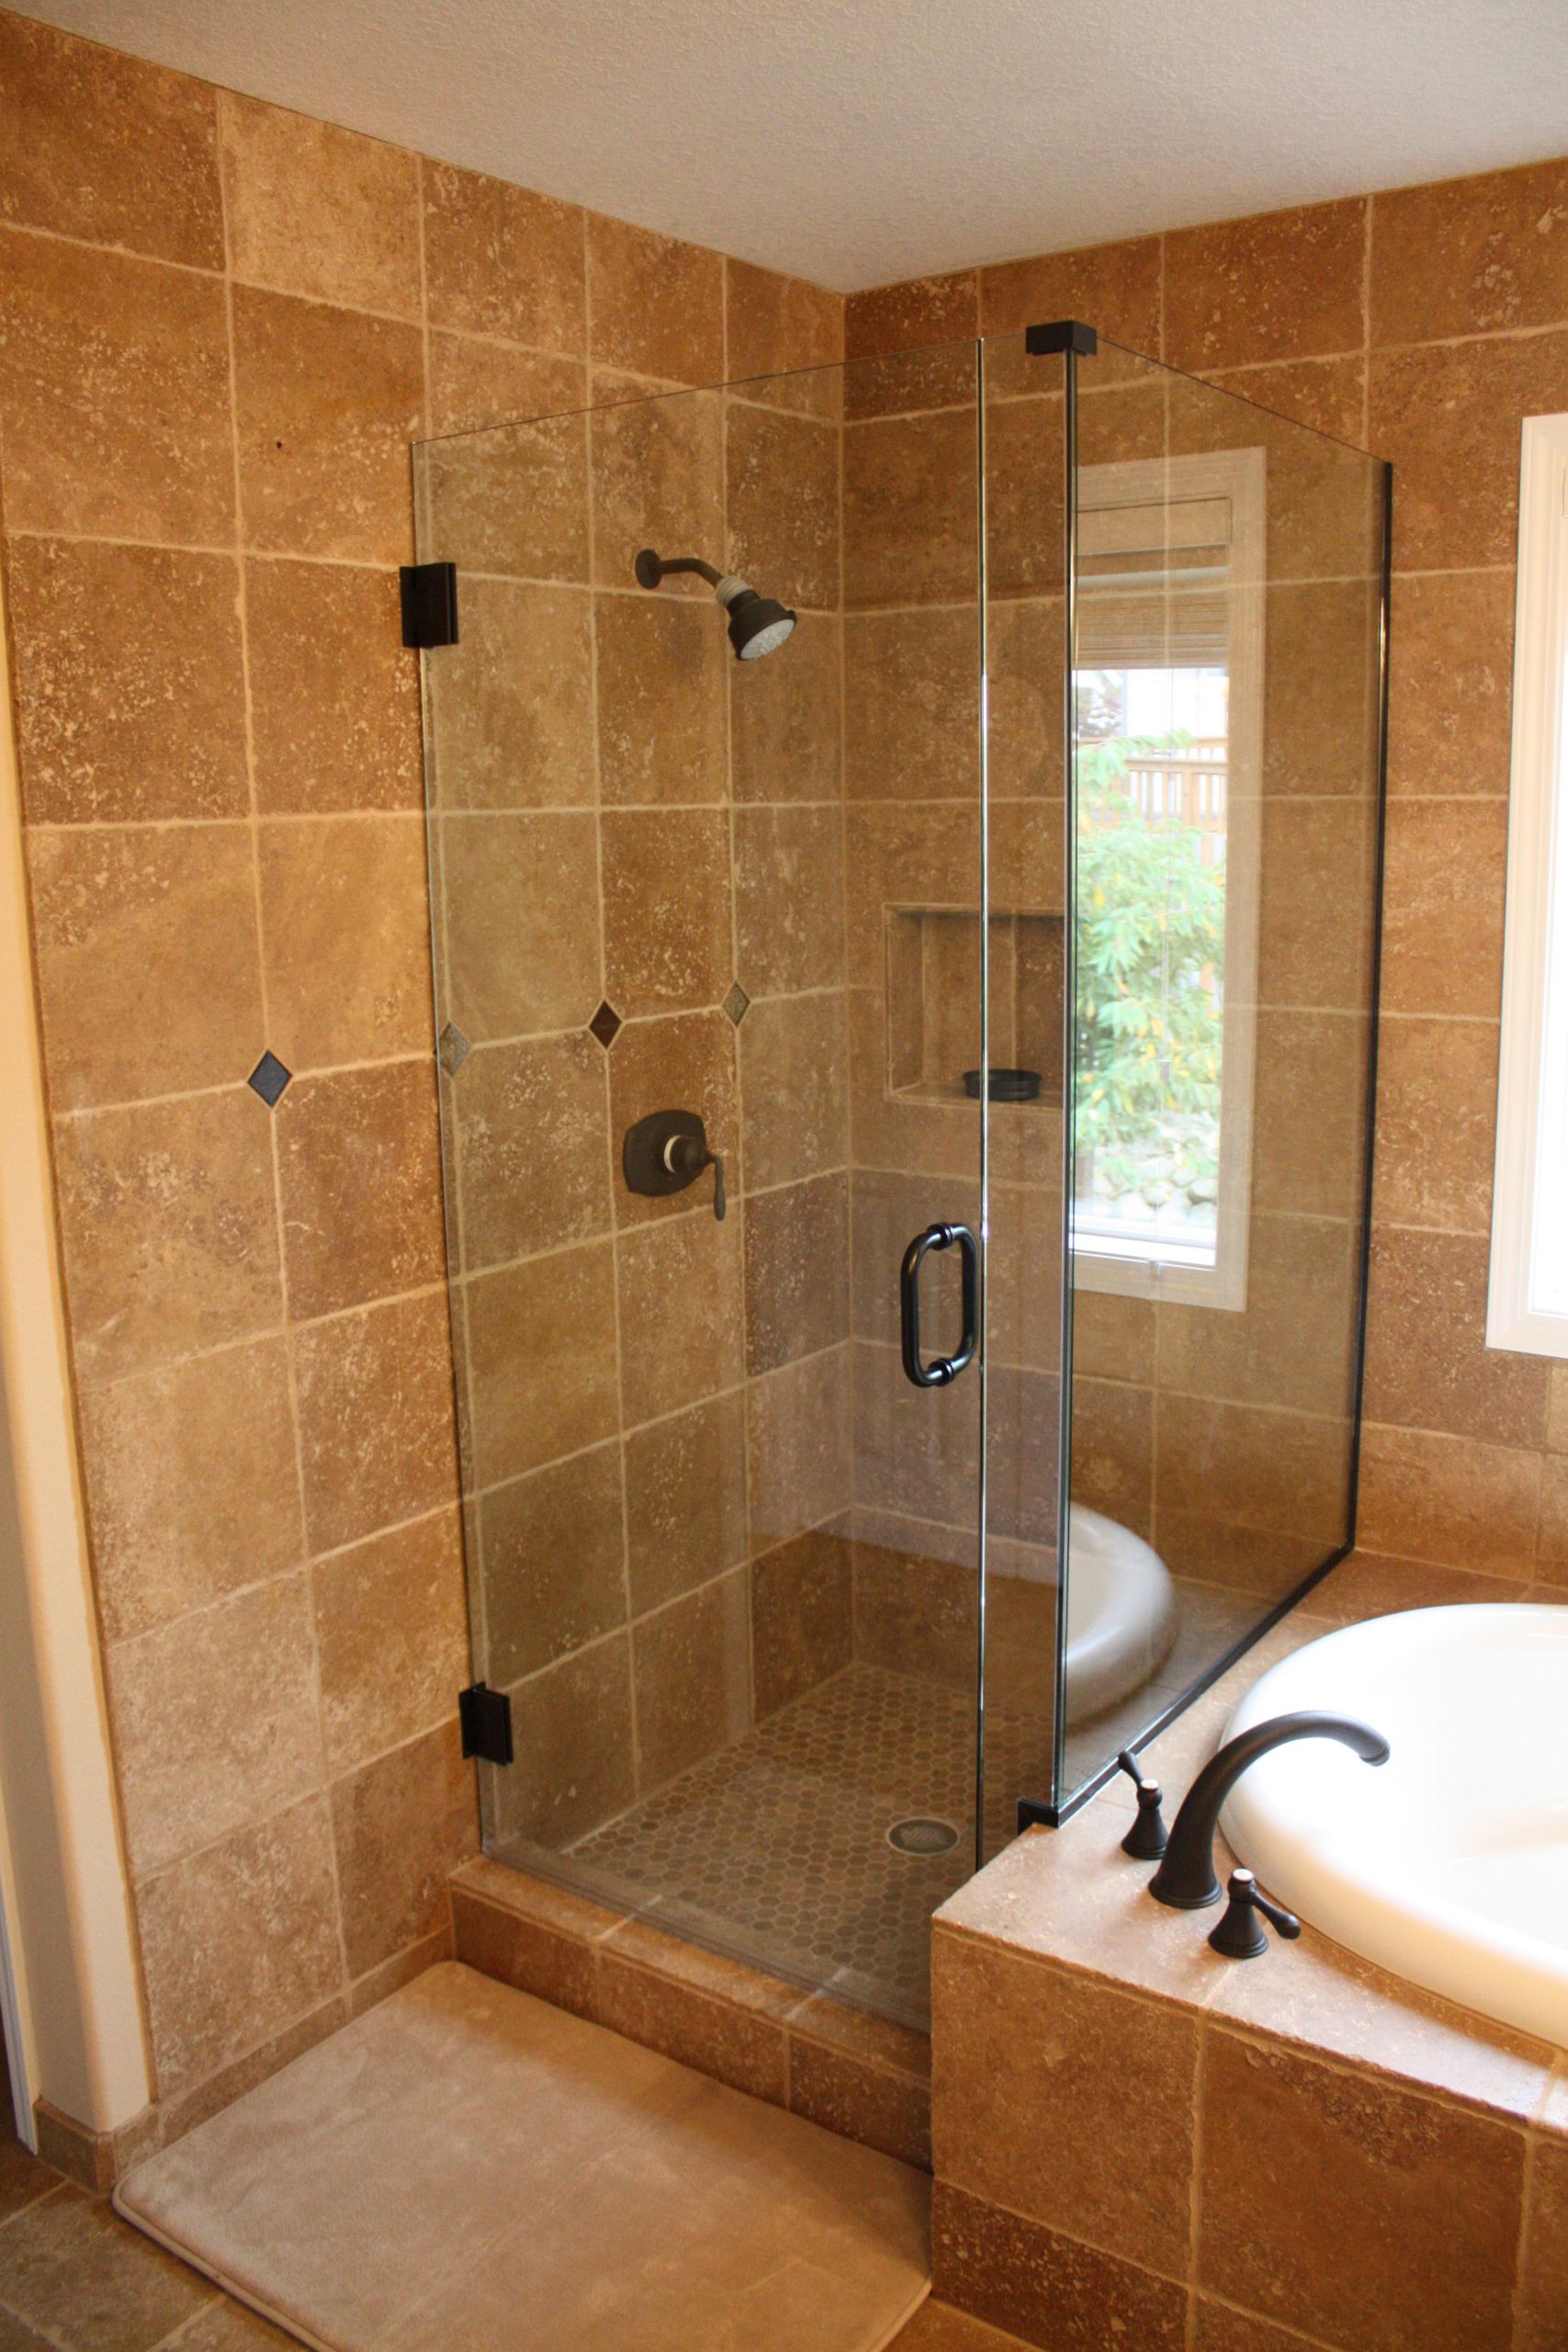 Rock Tile Bathroom
 30 cool ideas and pictures of natural stone bathroom